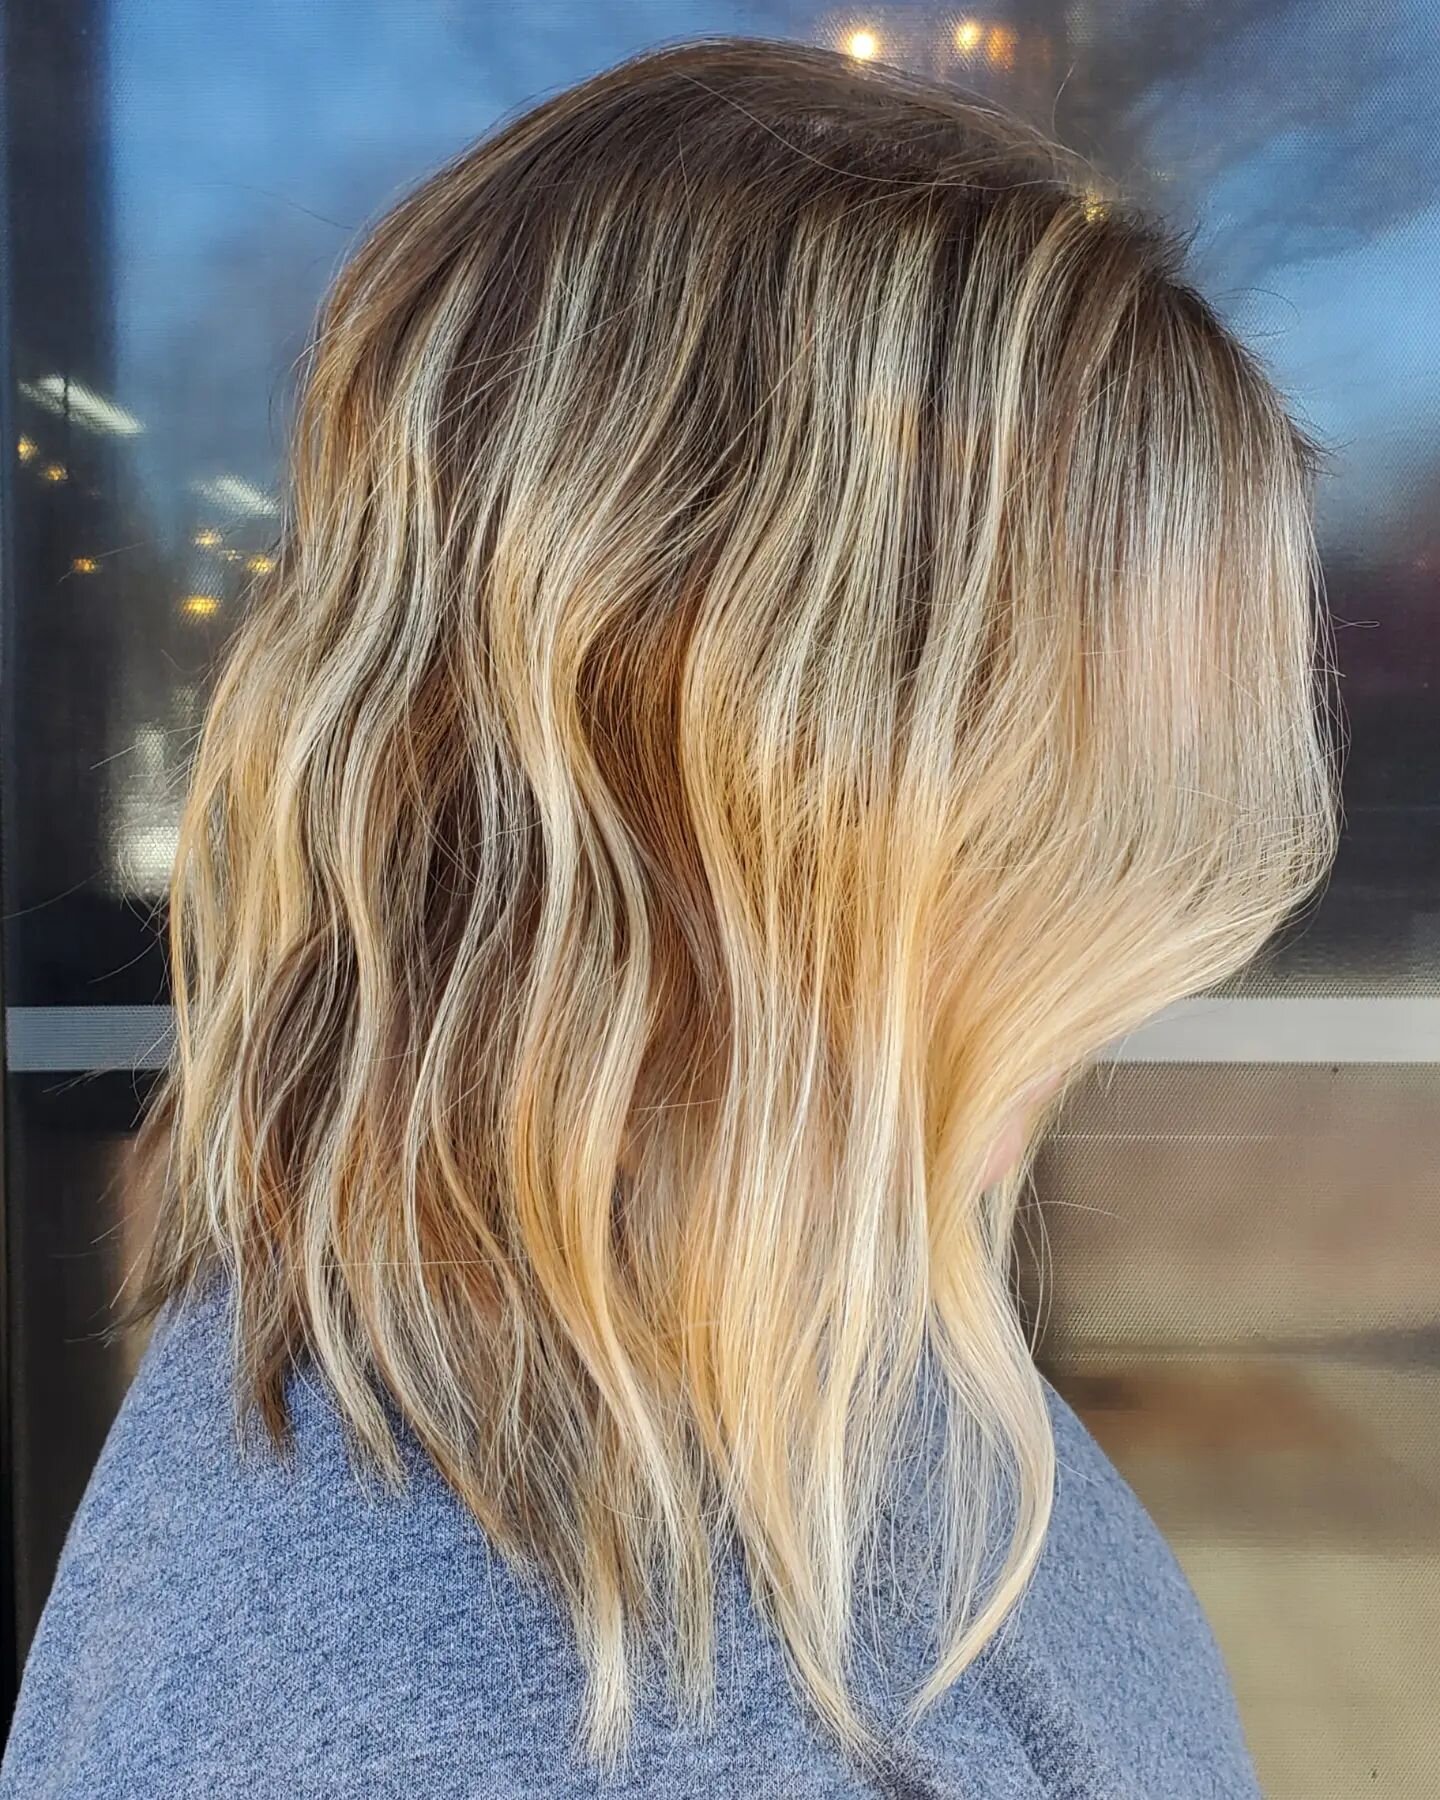 🌟beachy live-in hair vibes...muh fave🌟
&bull;
with the right amount of lightness, dimension, coolness and warmth we can create a natural vacation look
&bull;
let's bring our your inner surfer🏄&zwj;♀️ 
&bull;
&bull;
&bull;
#naturalfeelingcolor #vac